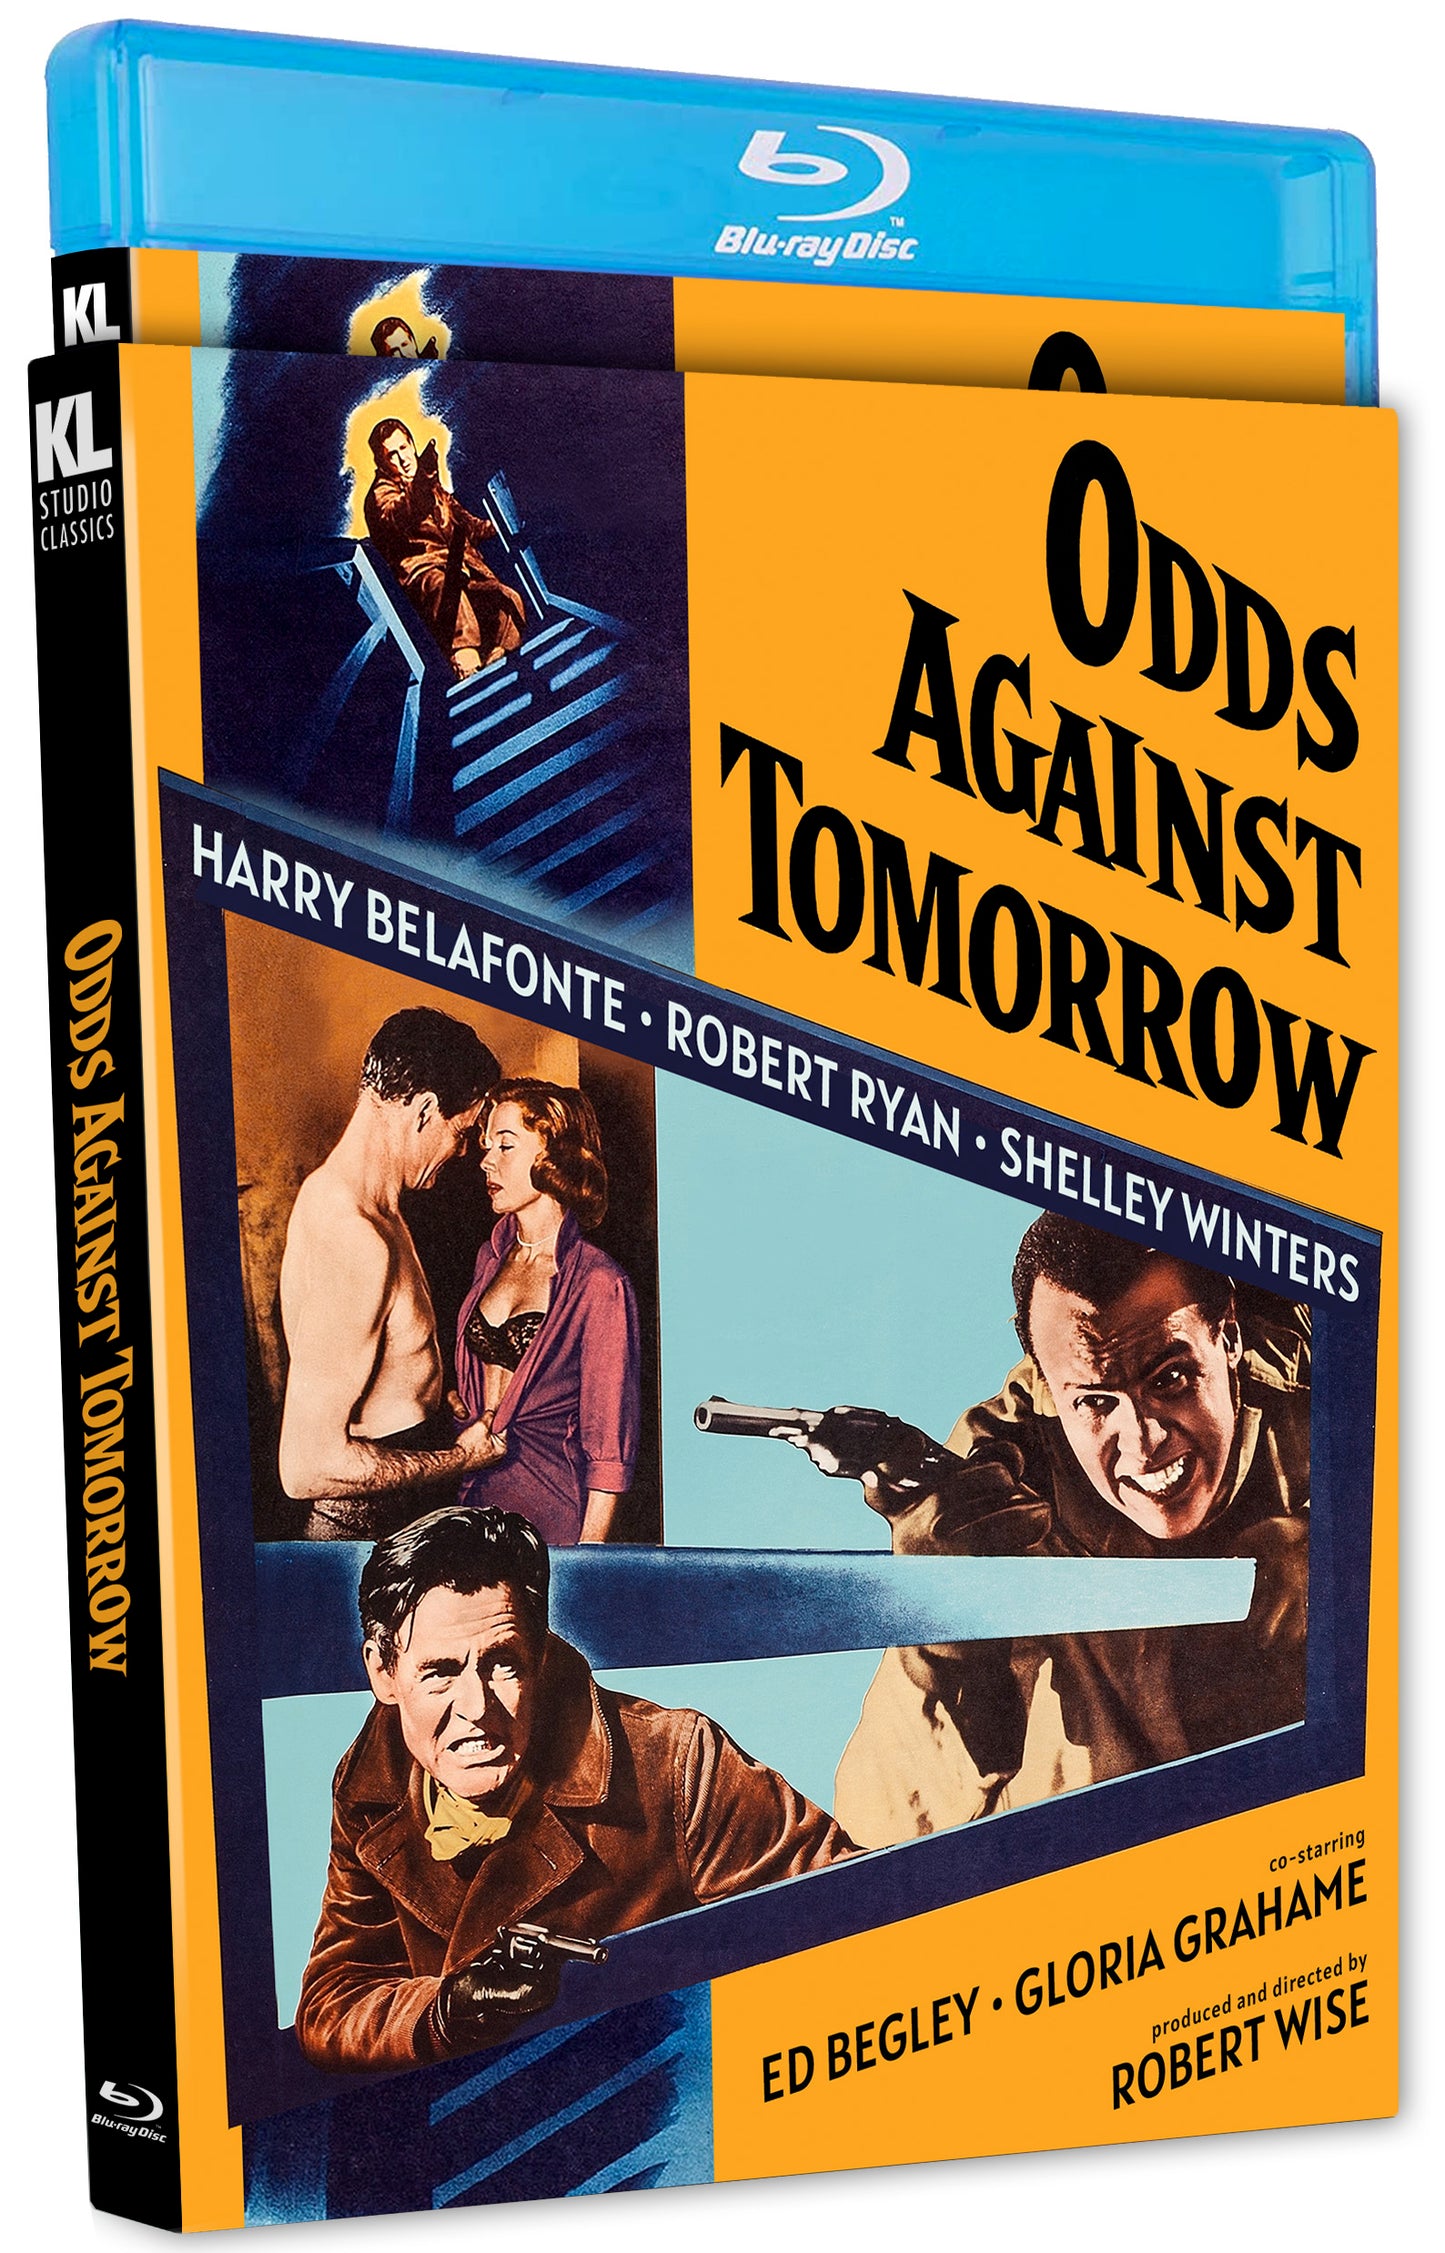 Odds Against Tomorrow Special Edition Blu-ray with Slipcover (Kino Lorber)